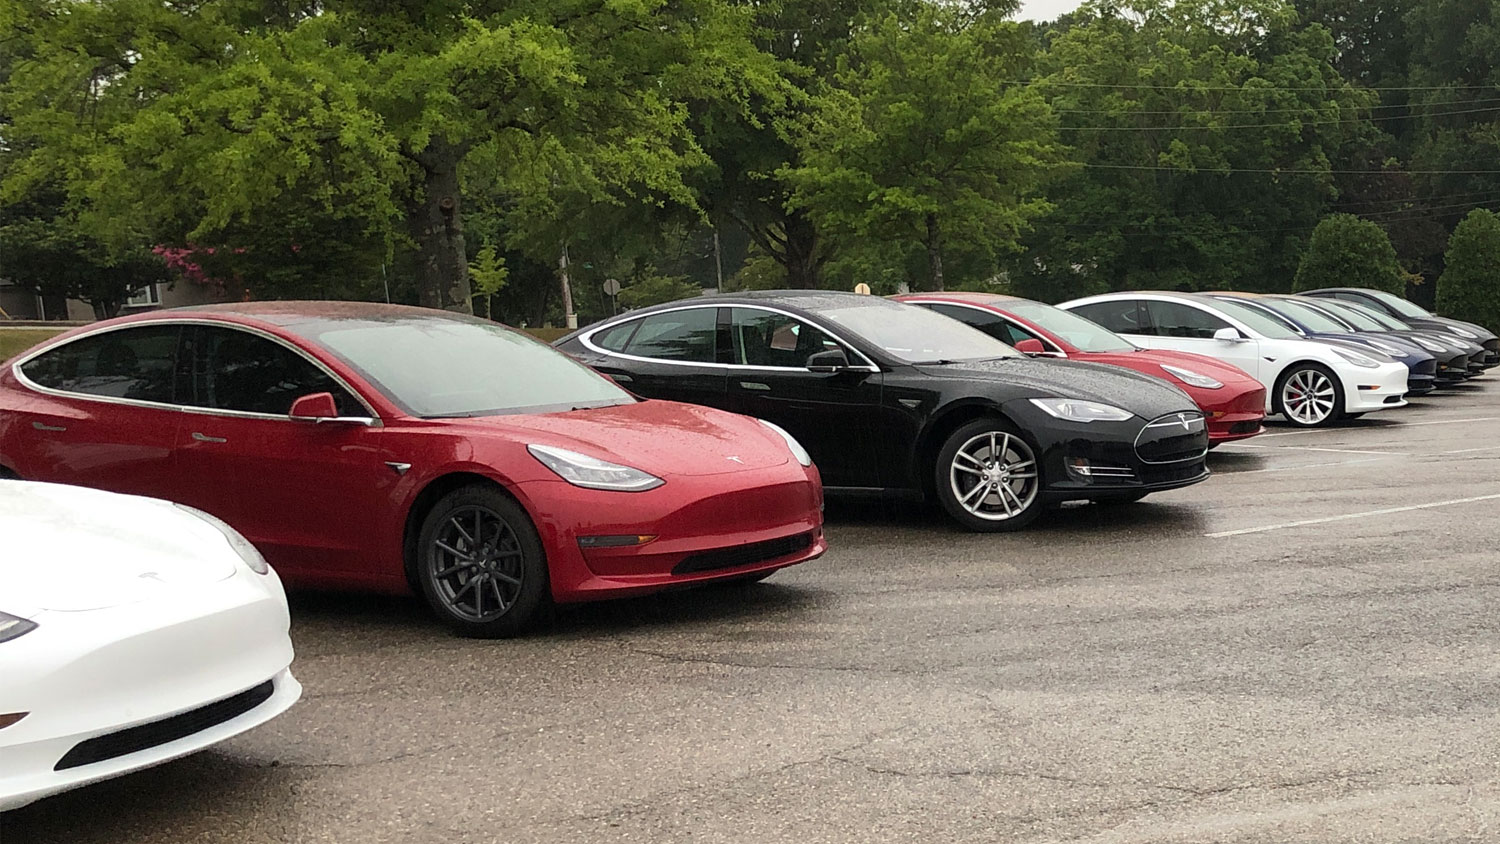 East Tennessee Tesla owners line up for photo shoot